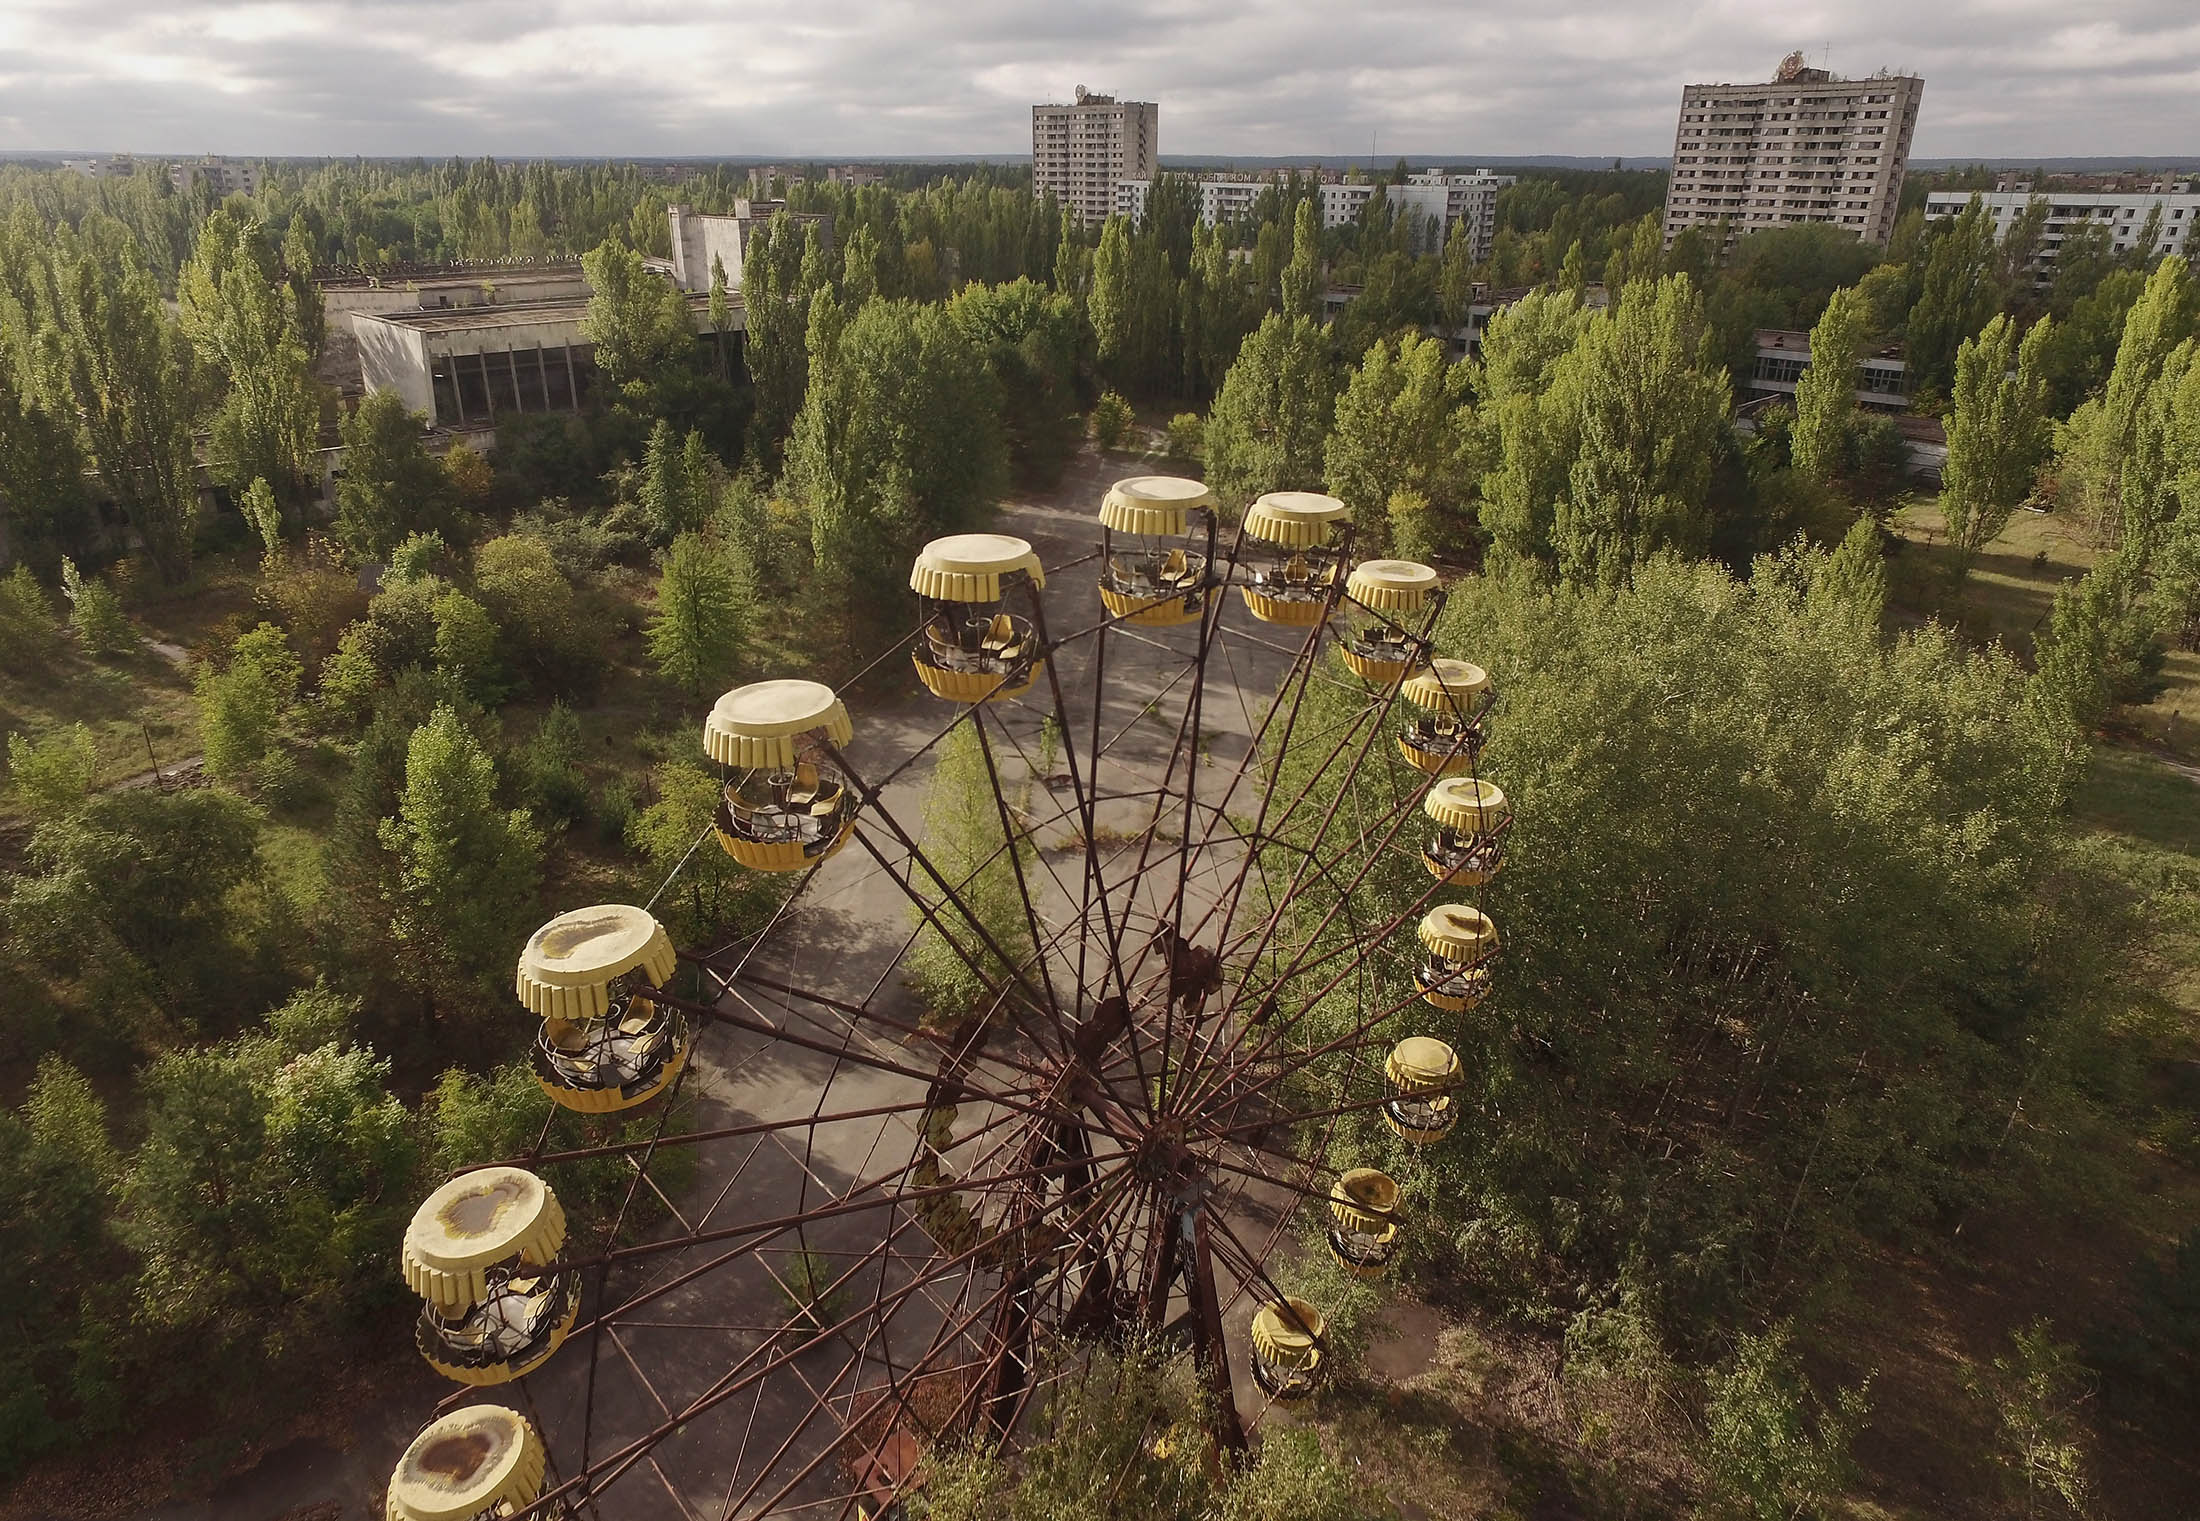 The small city of Pripyat,, a few kilometers from the Chernobyl nuclear power plant and was built in the 1970s to house the plant's workers and their families.
